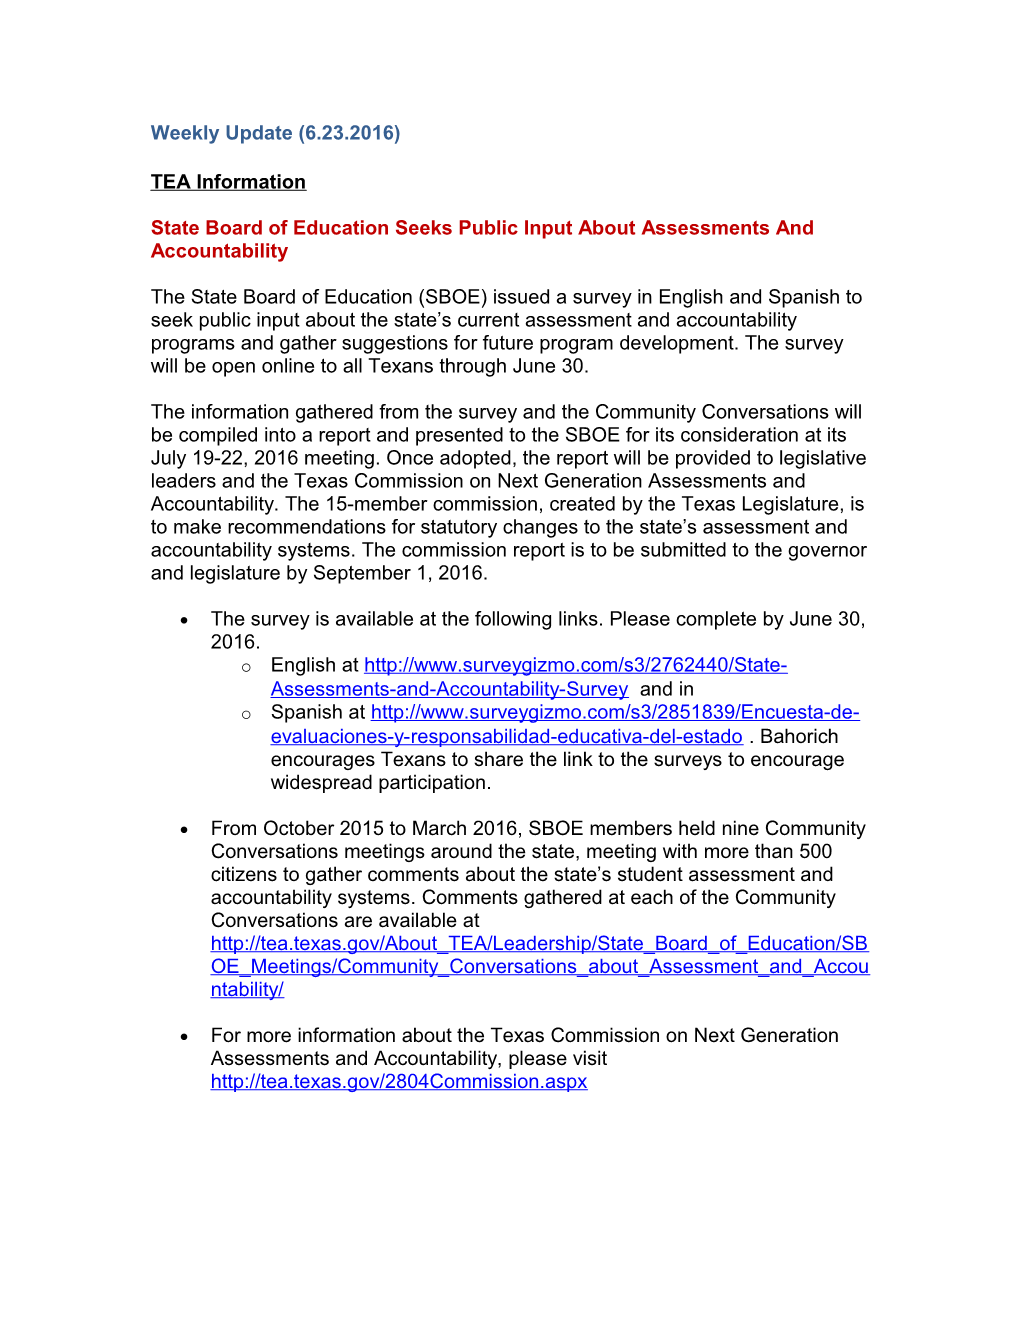 State Board of Education Seeks Public Input About Assessments and Accountability